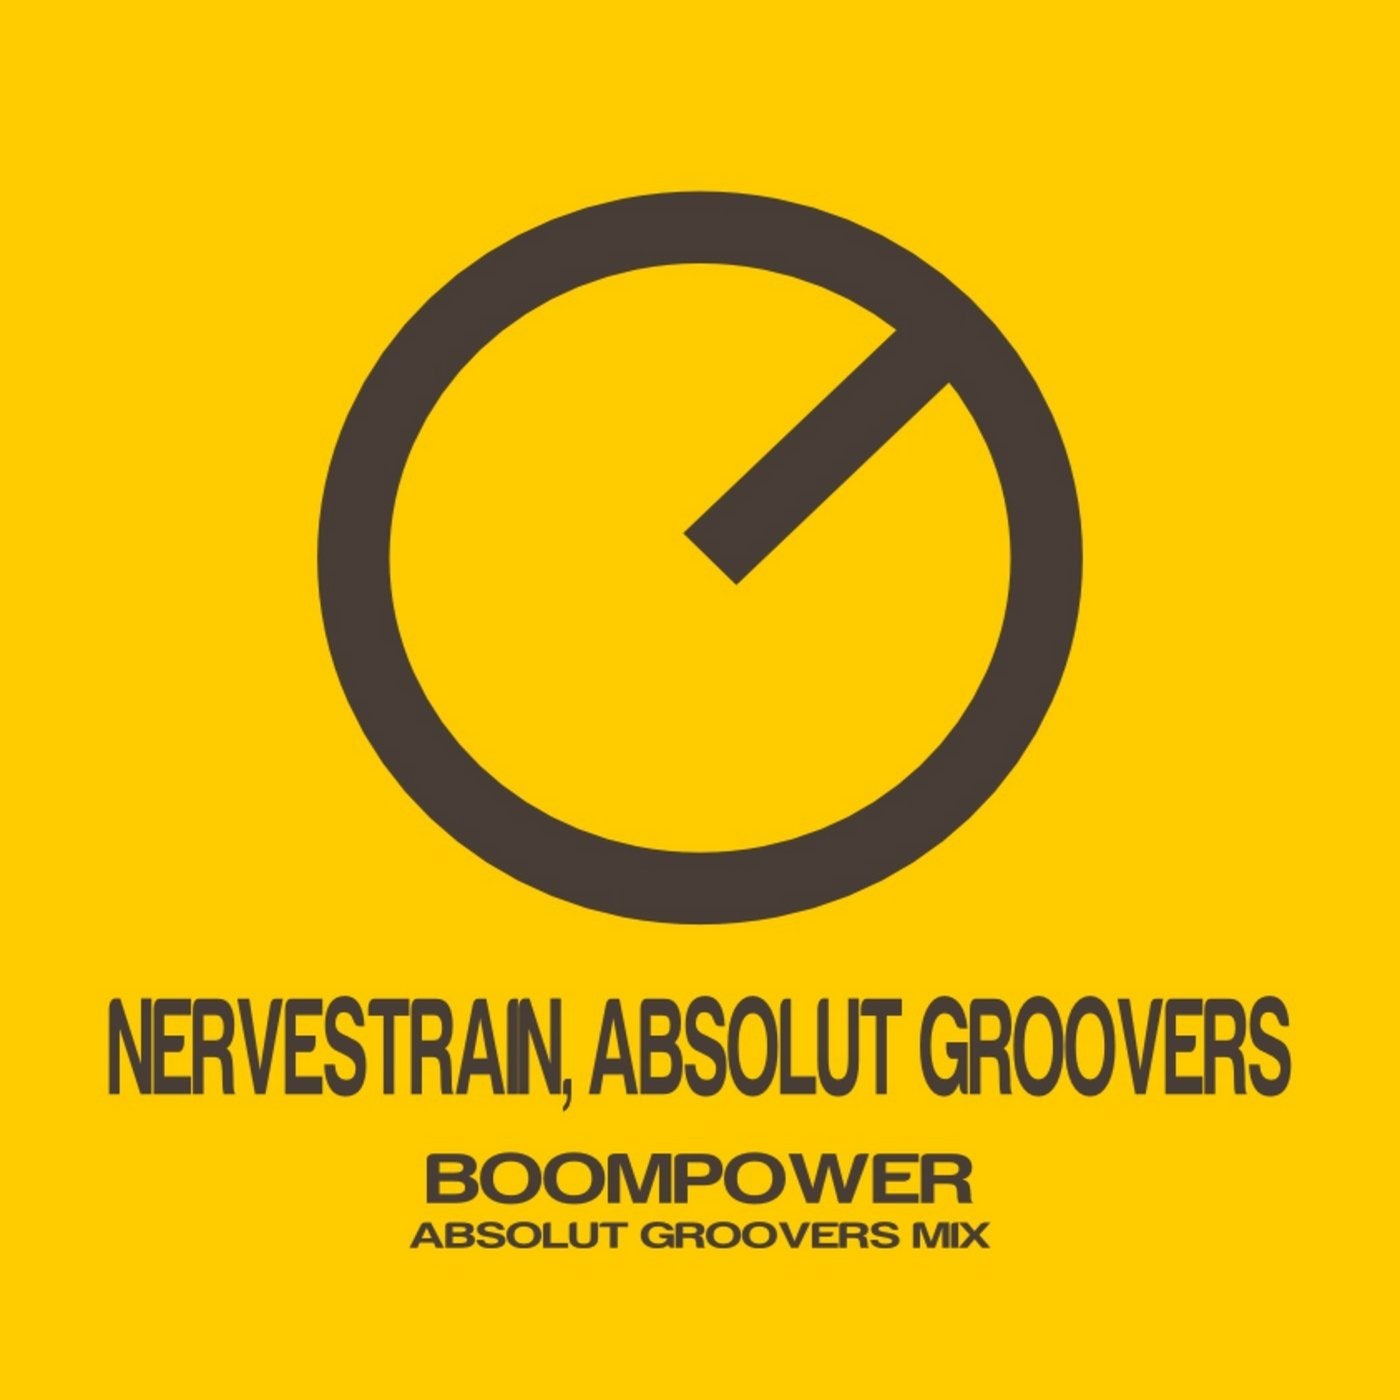 Boompower - Absolut Groovers Mix